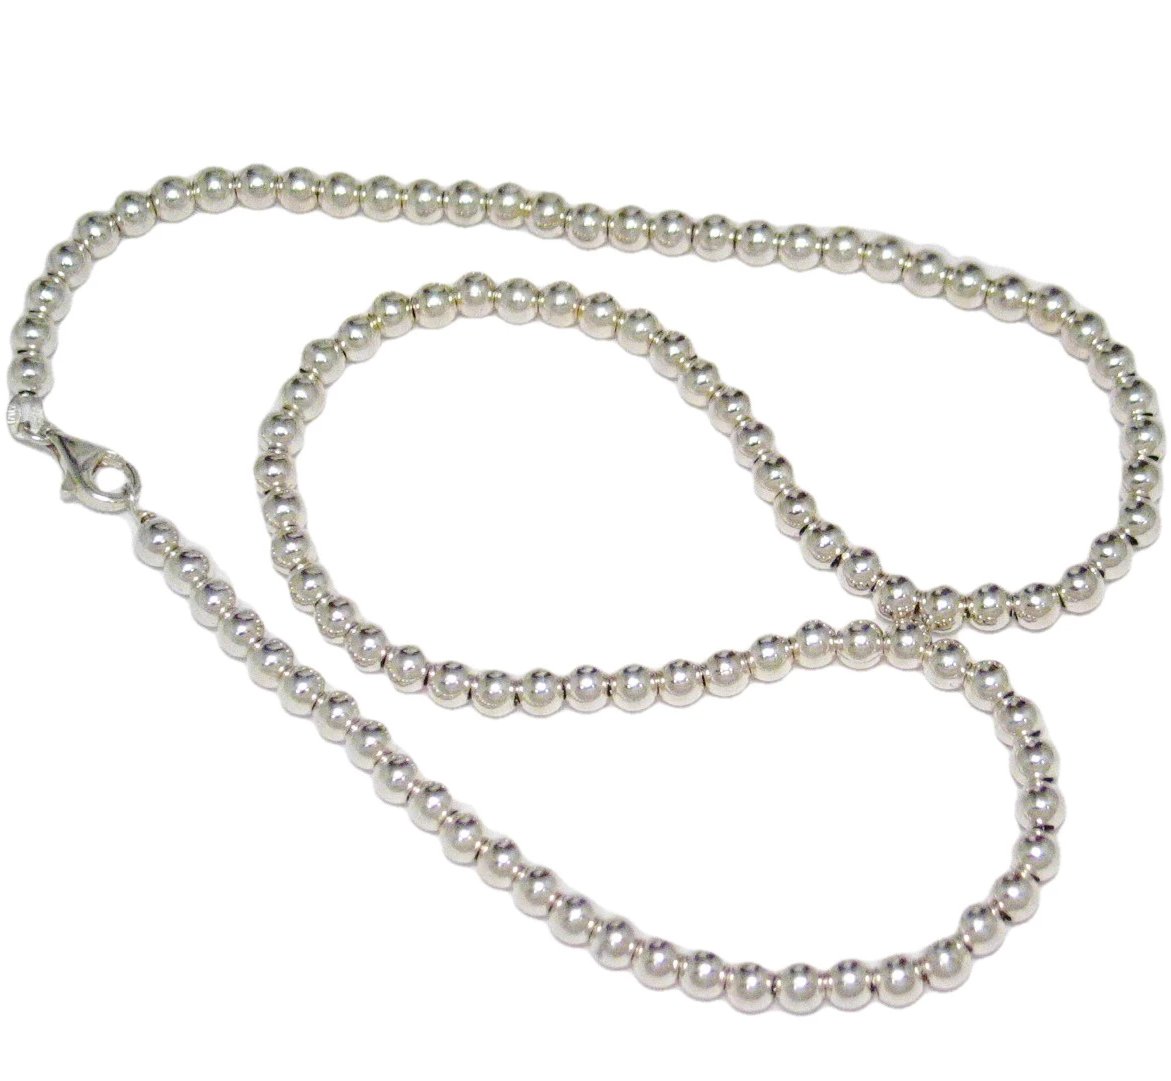 Low Cost Used Jewelry | Quality Made 20.25" Sterling Silver 5mm Bead Ball Chain Necklace Mens Womens